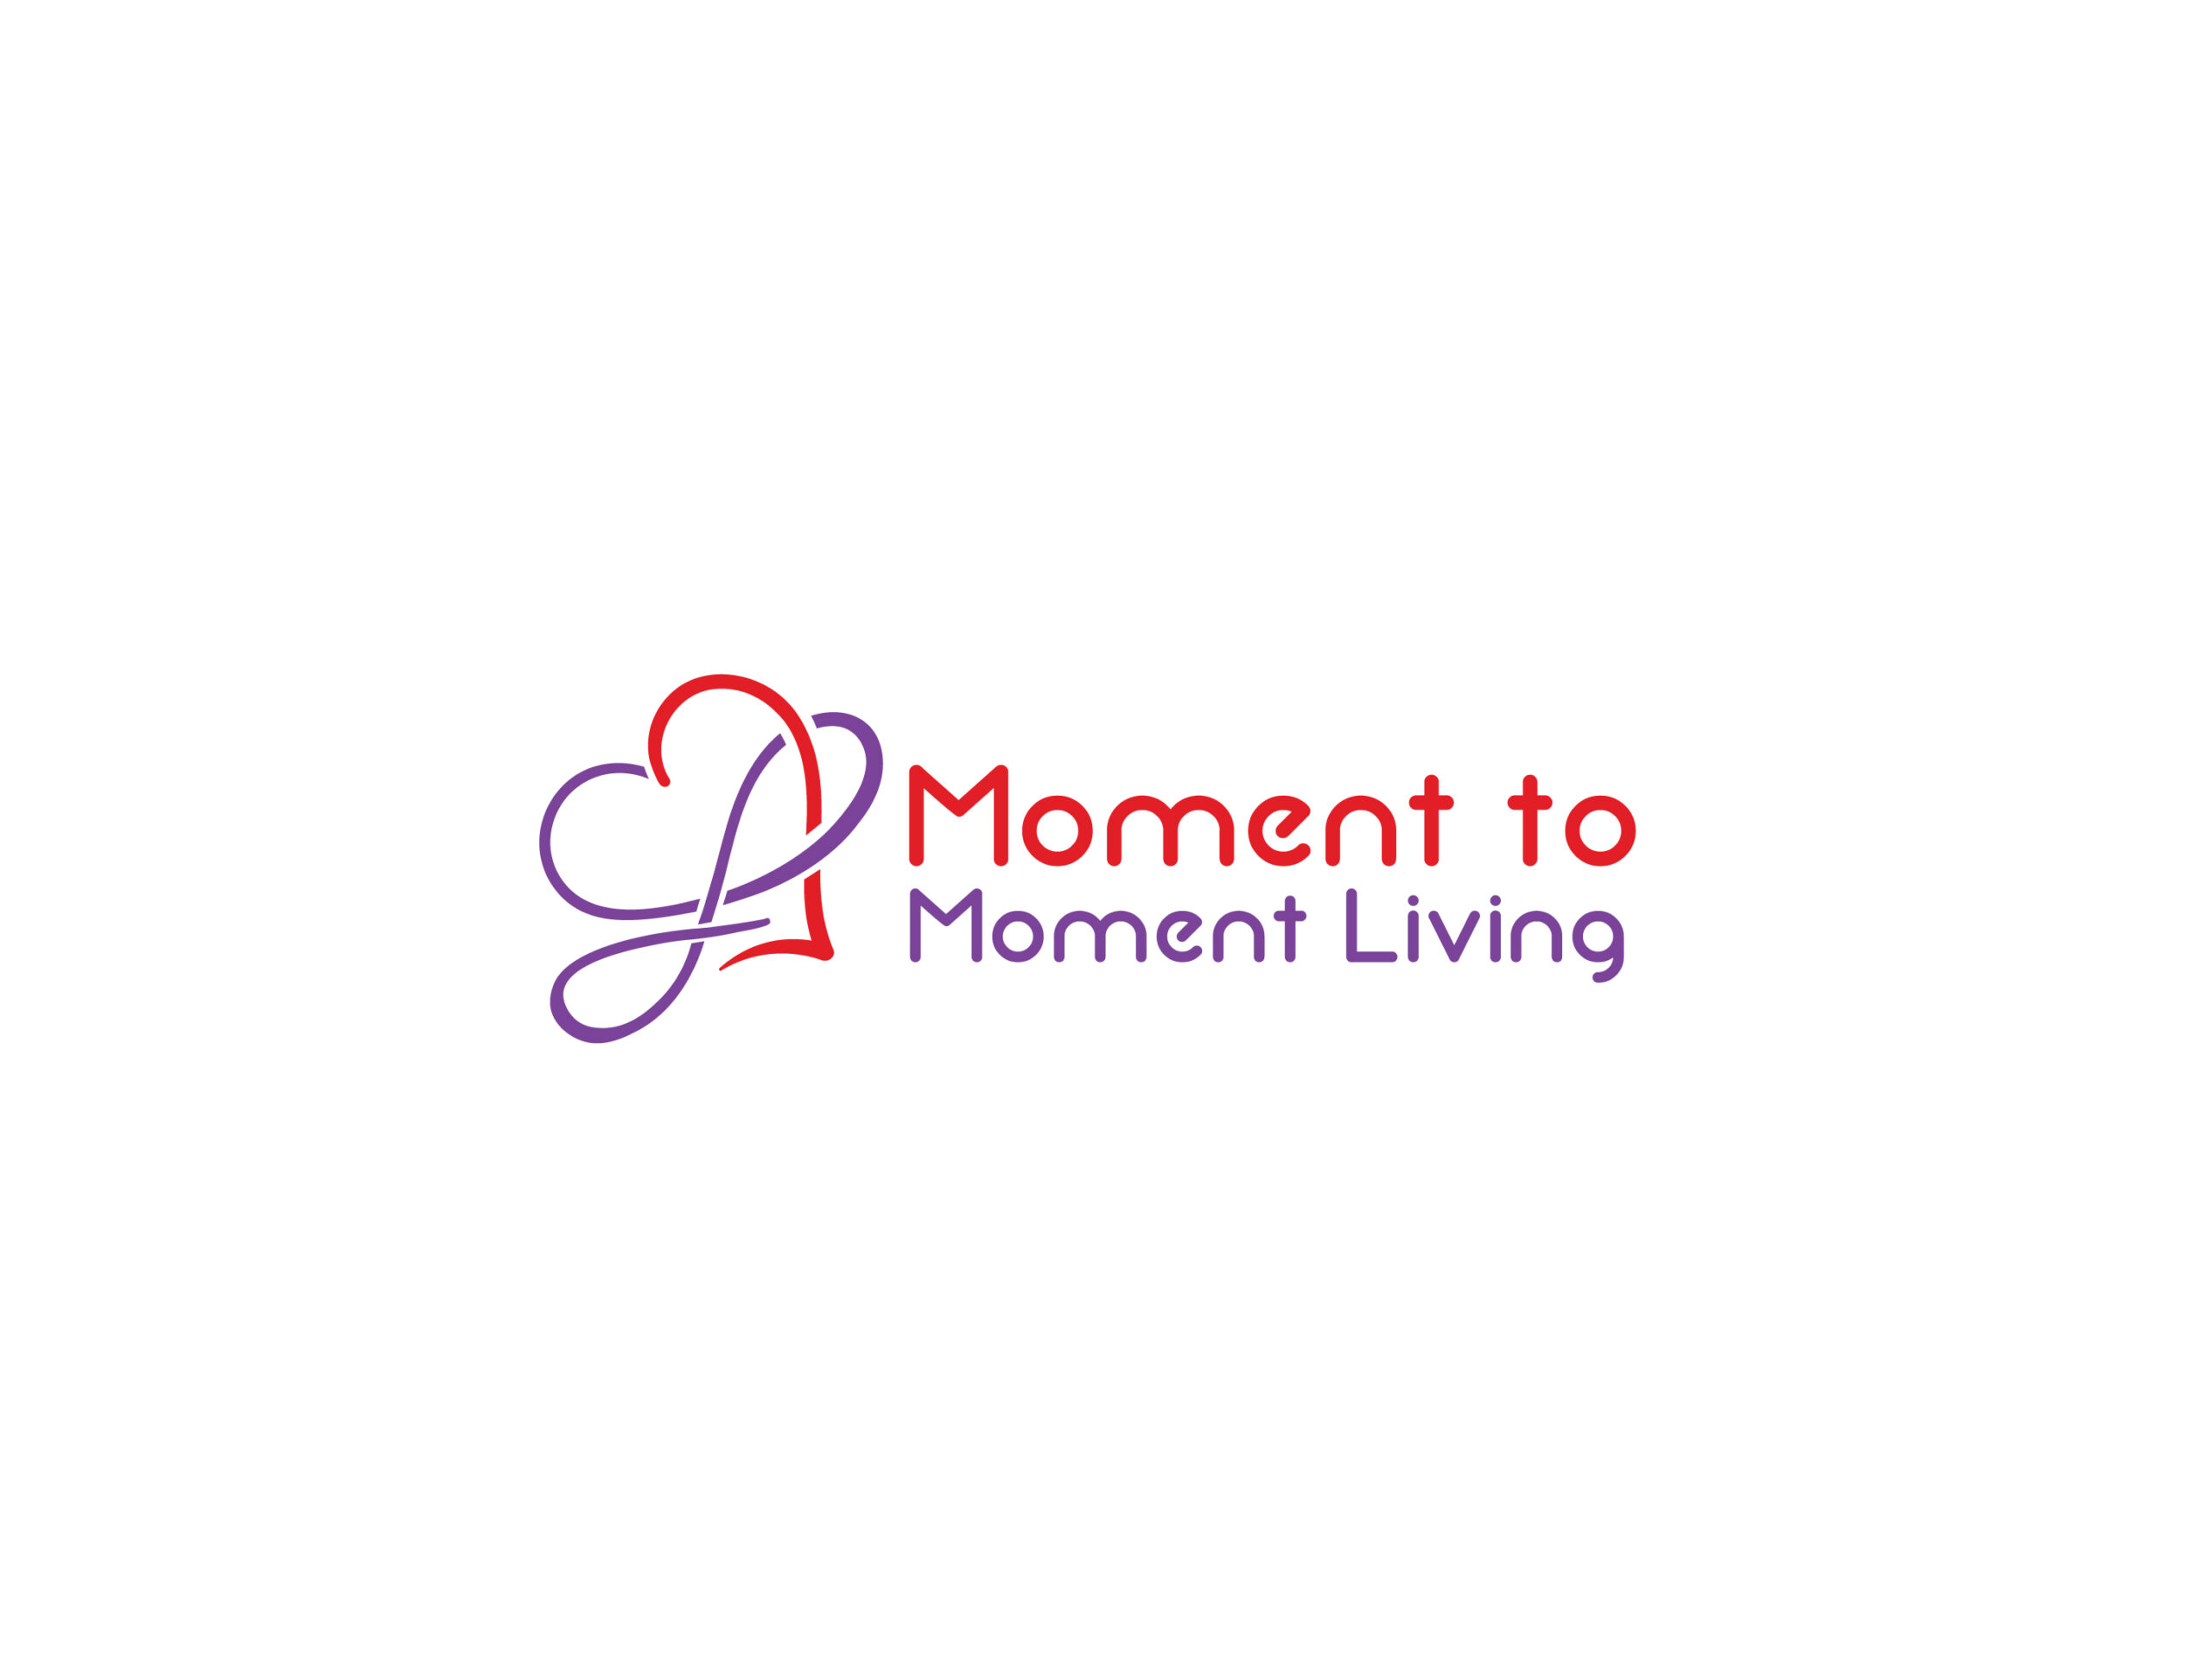 Moment to Moment Living